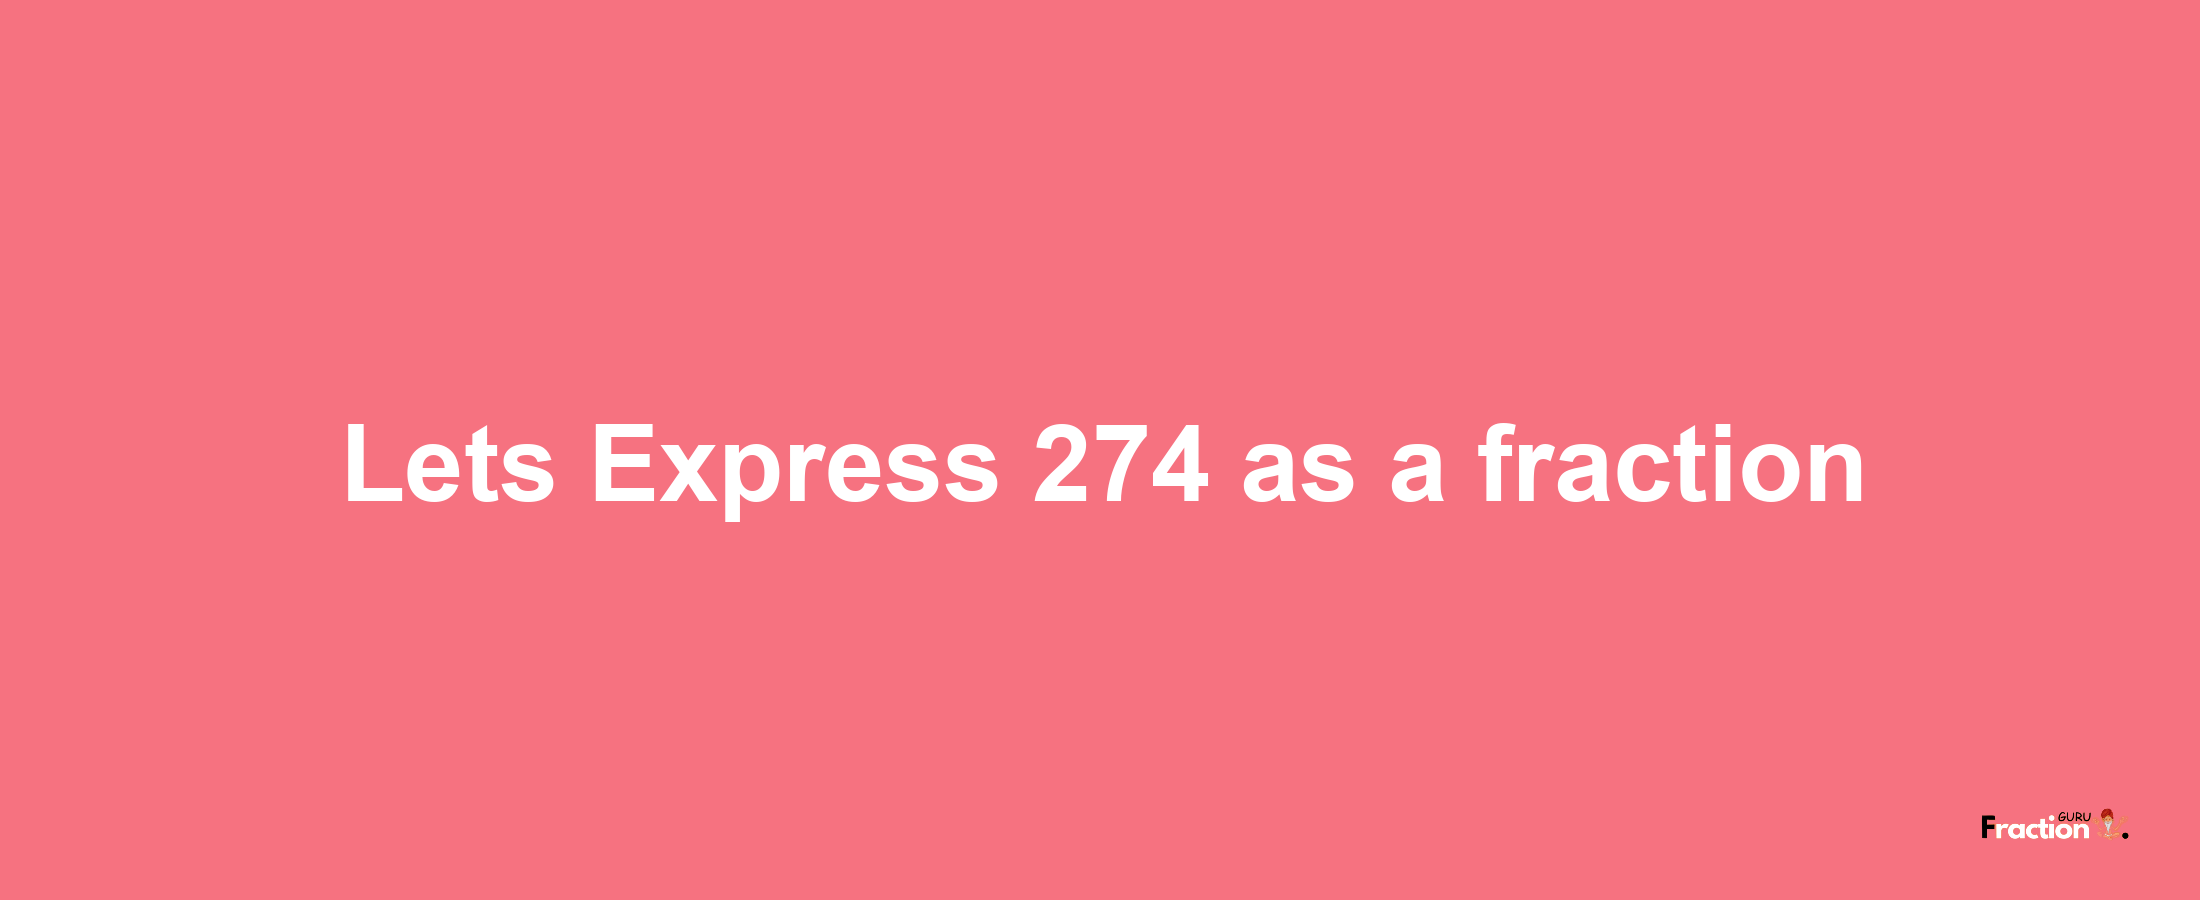 Lets Express 274 as afraction